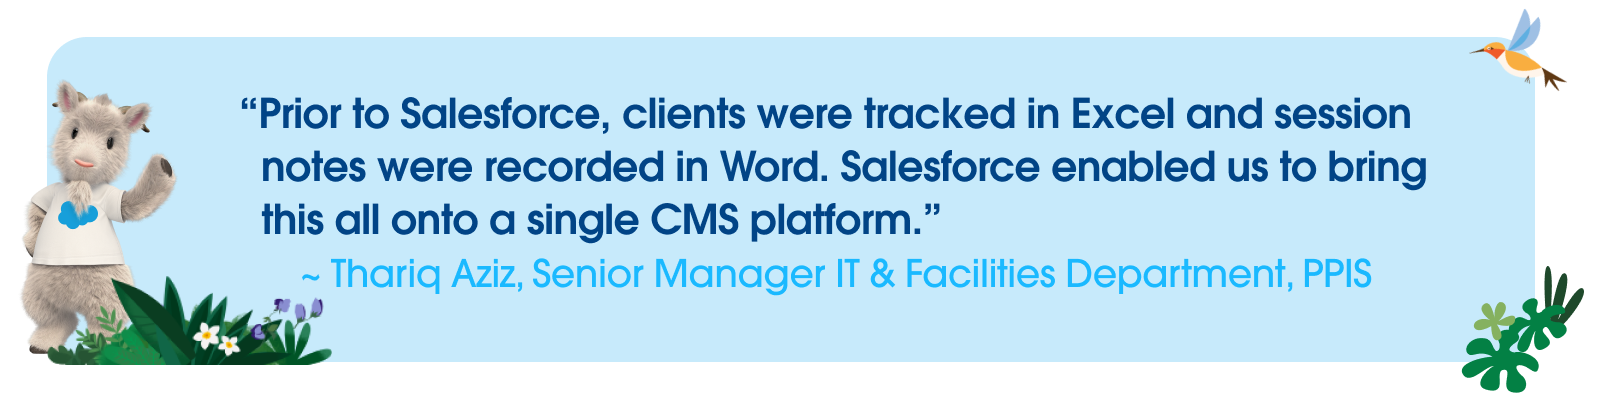 Thariq Aziz, Senior Manager IT & Facilities Department, PPIS describing how Salesforce consolidated and tracked clients' sessions on one single CMS platform. 